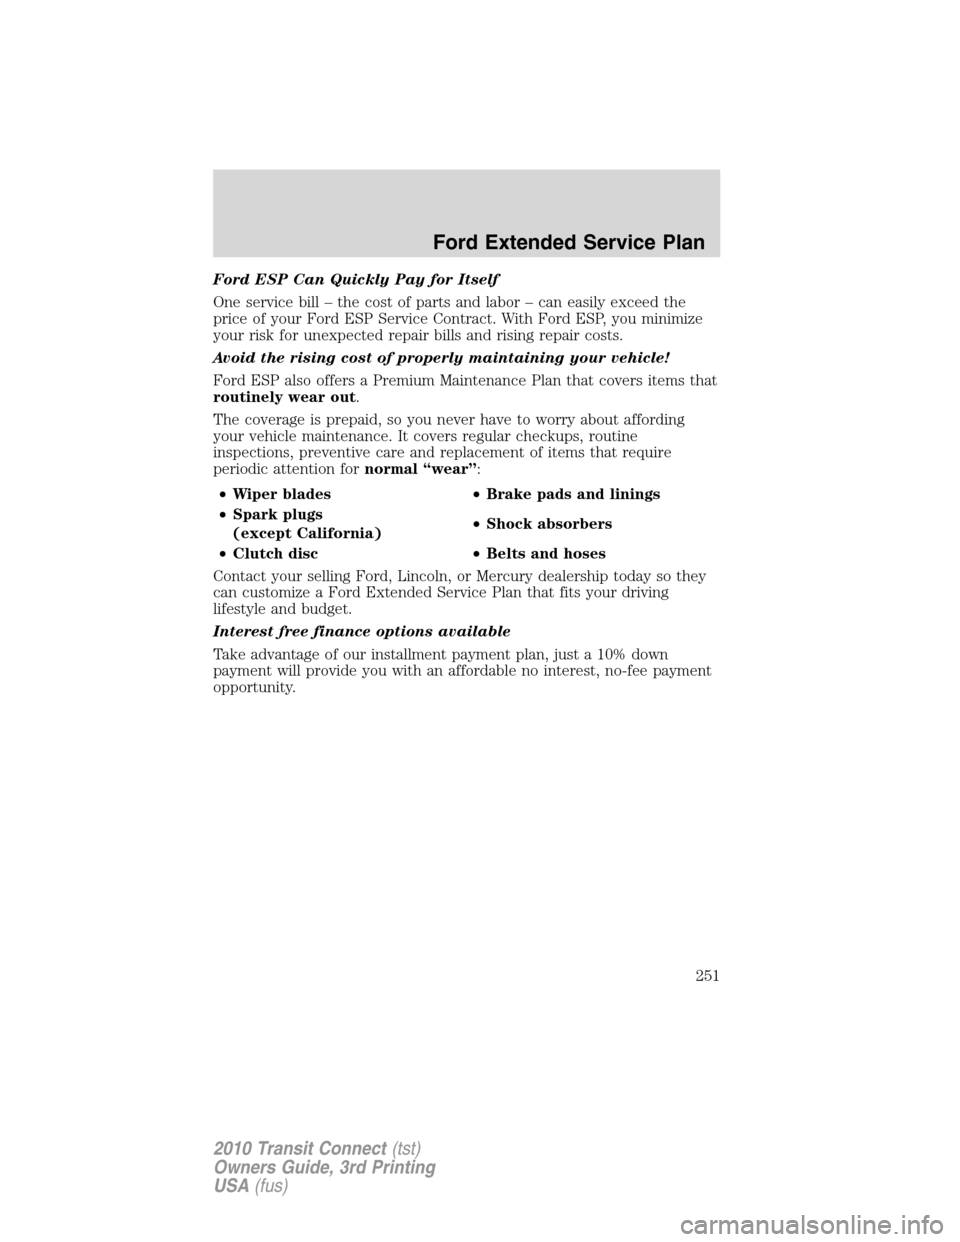 FORD TRANSIT CONNECT 2010 1.G Owners Manual Ford ESP Can Quickly Pay for Itself
One service bill – the cost of parts and labor – can easily exceed the
price of your Ford ESP Service Contract. With Ford ESP, you minimize
your risk for unexpe